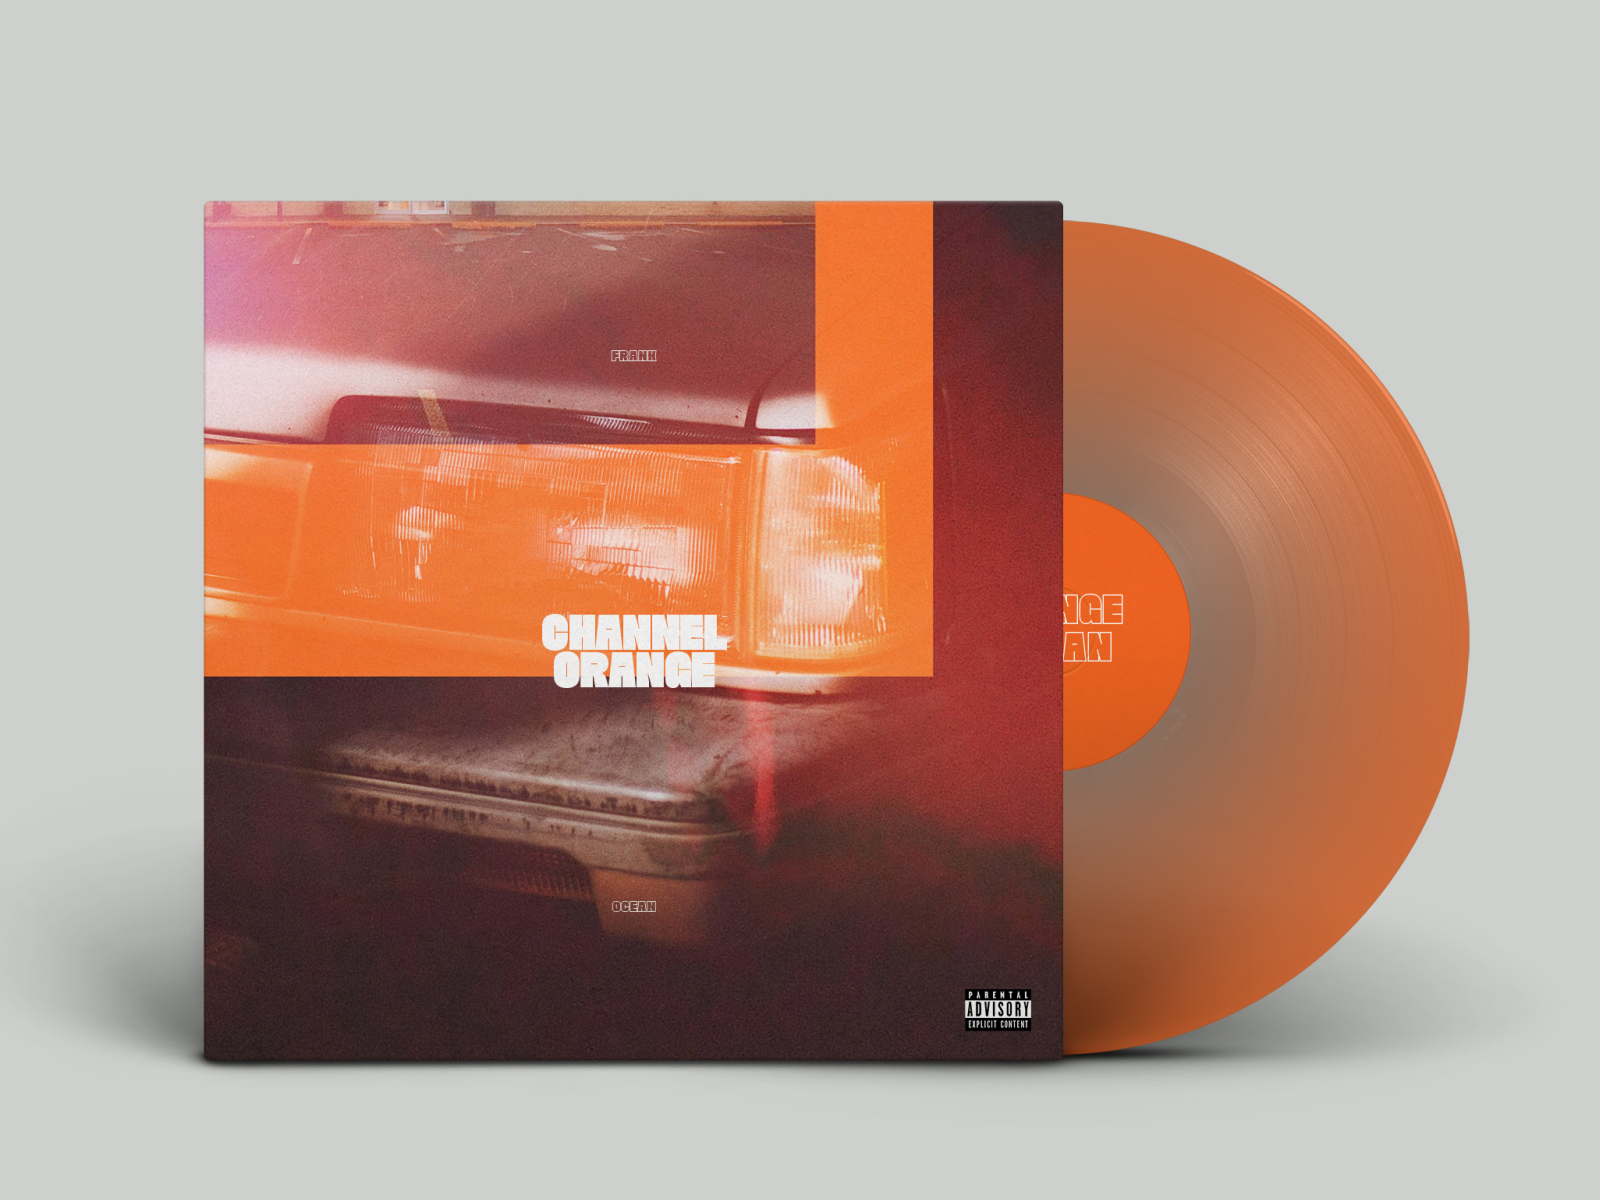 Channel Orange LP by Zachary Keimig on Dribbble